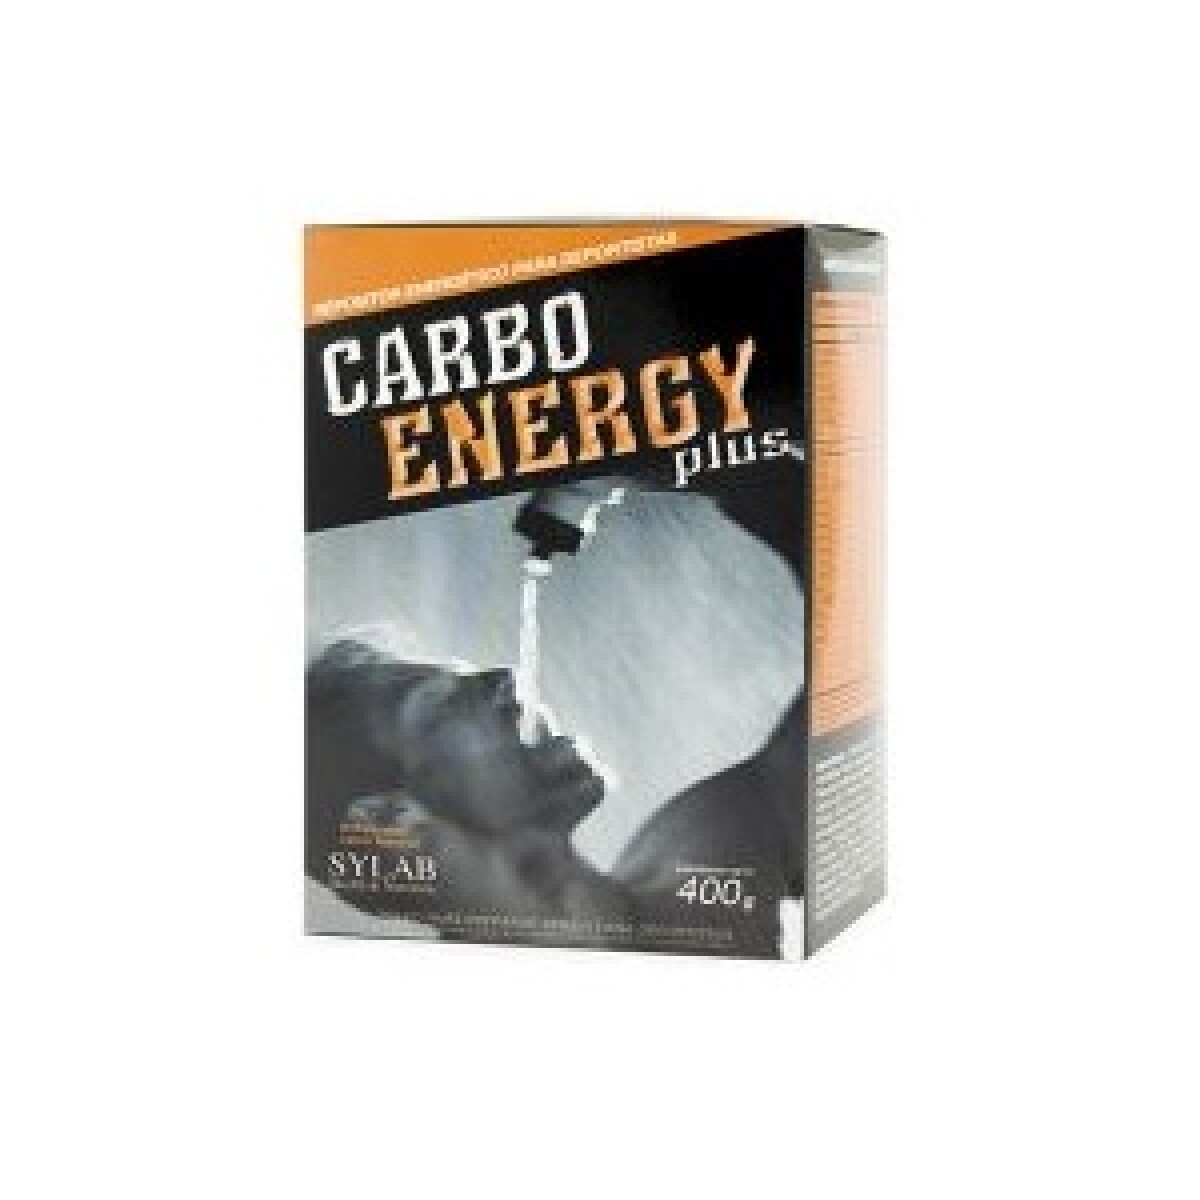 Carbo Energy Plus Sylab 400g Rs. 